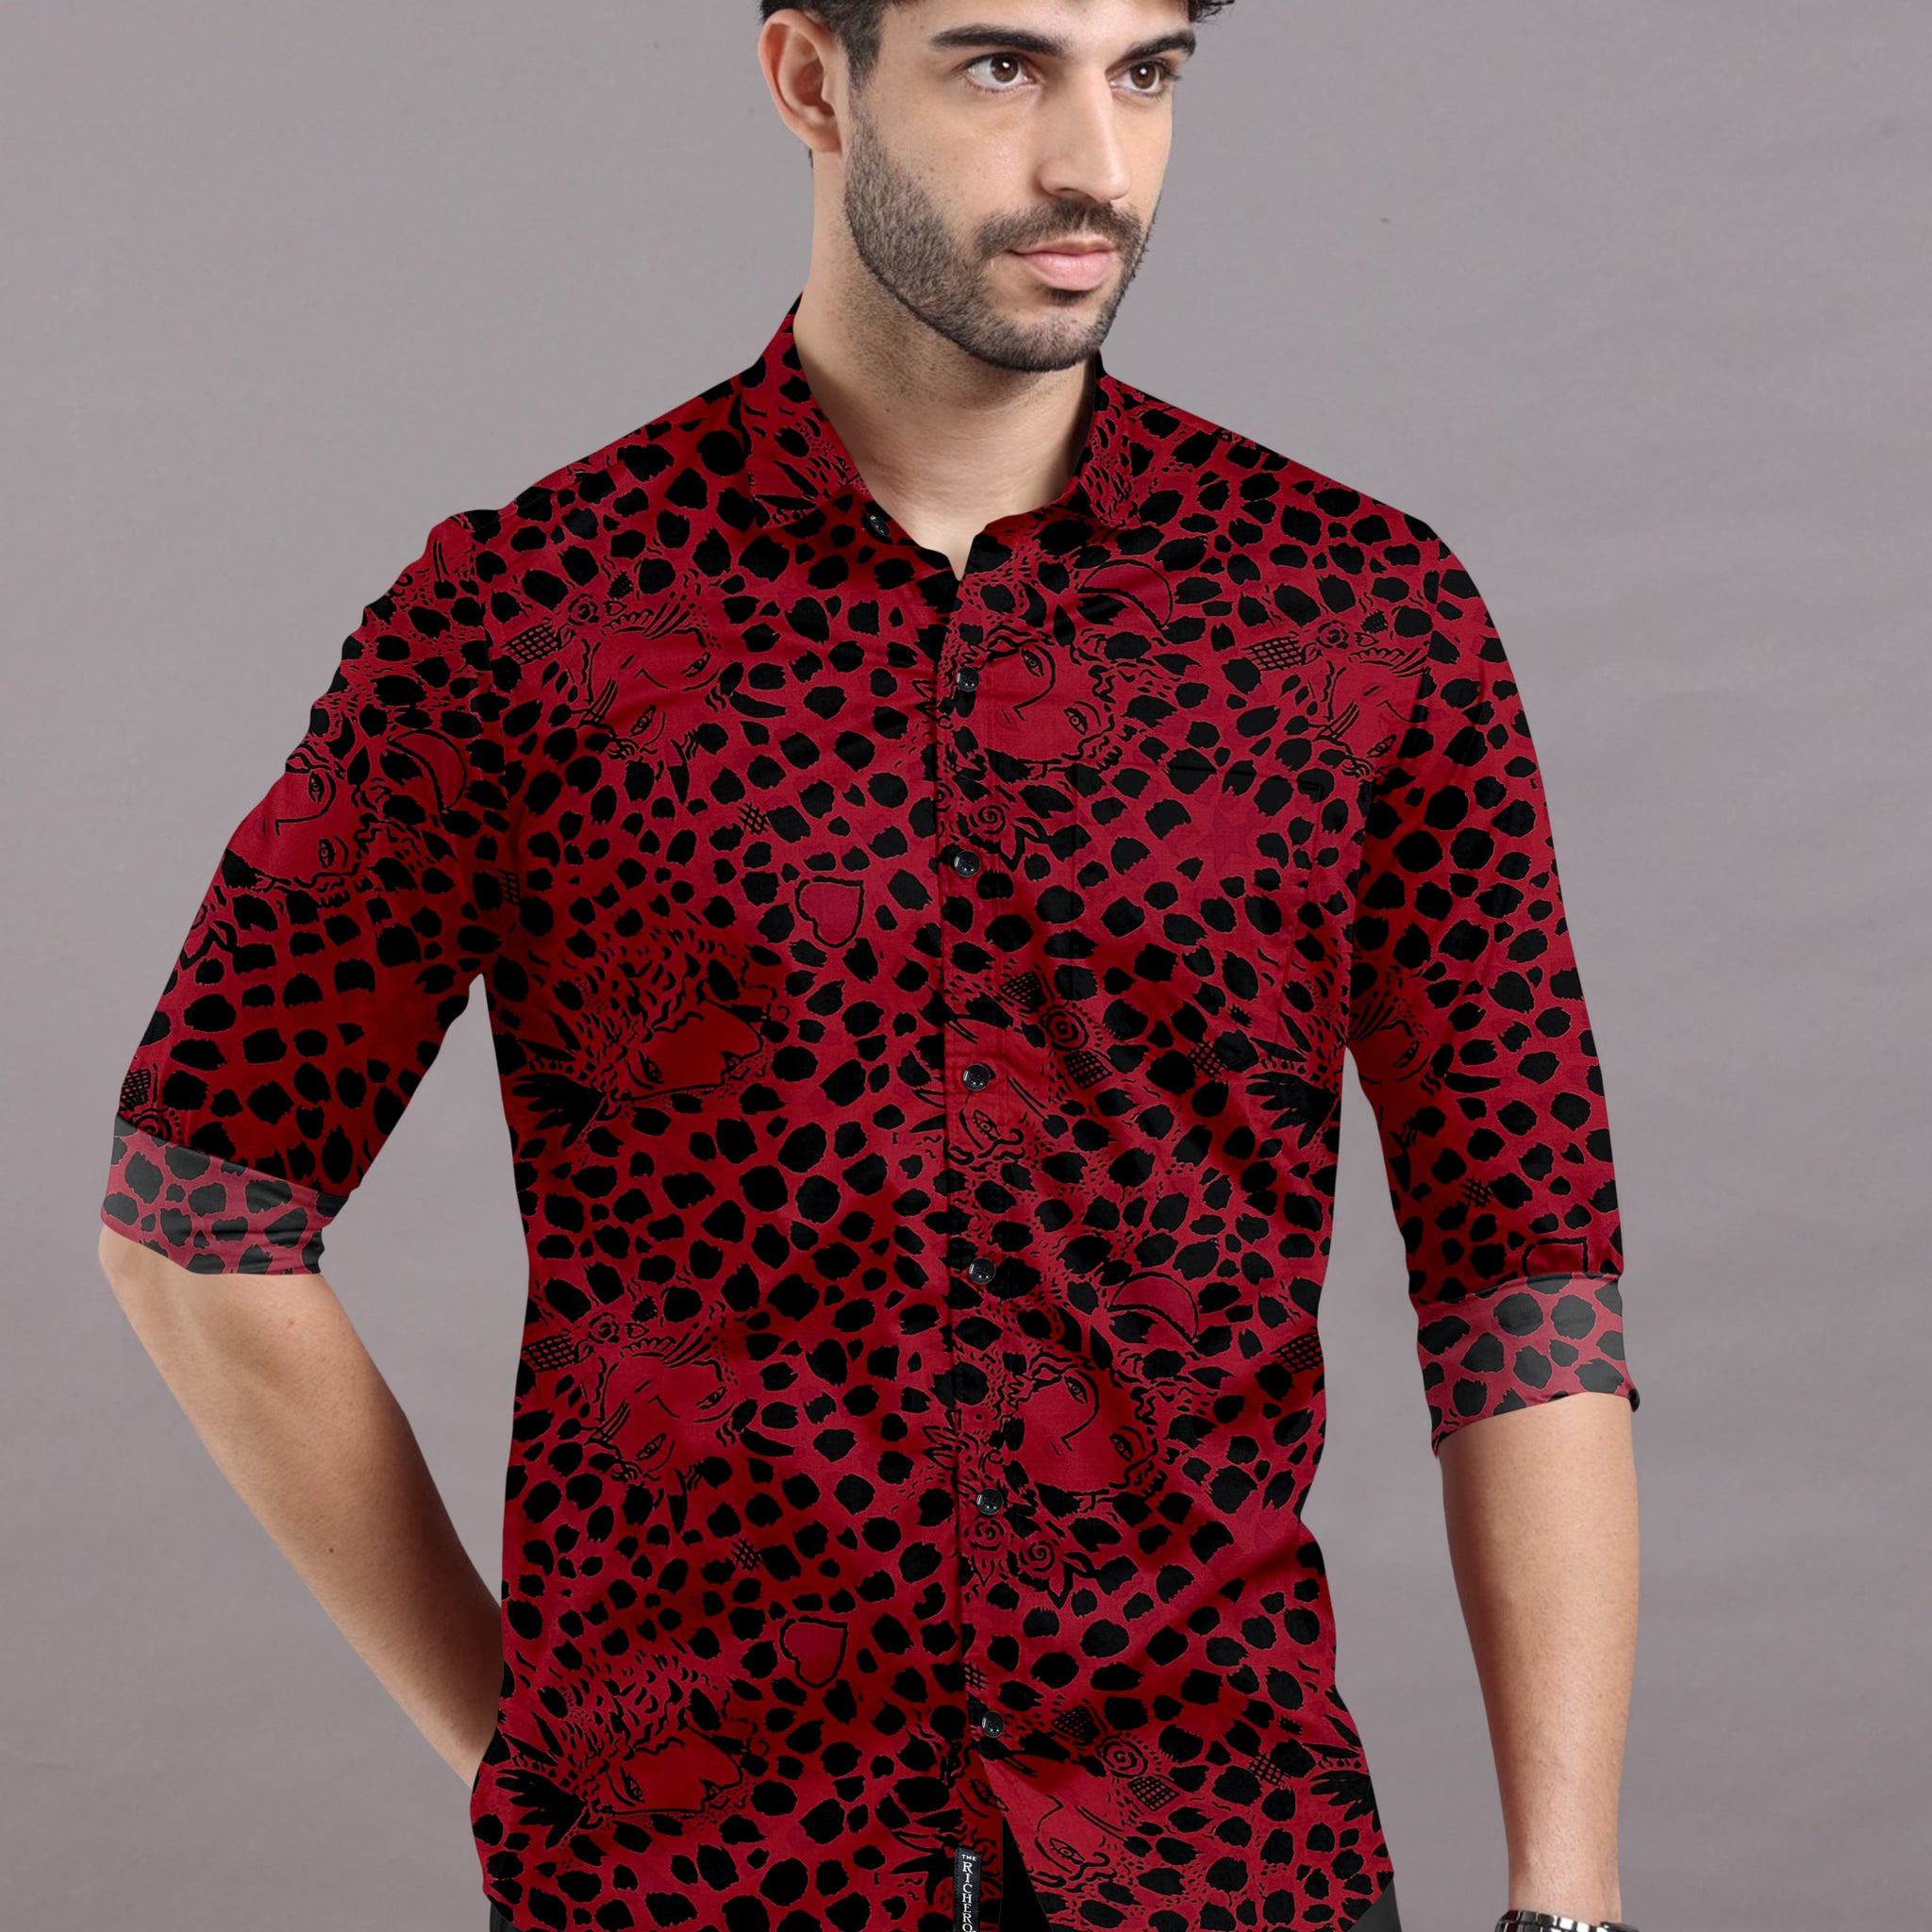 Wild Red Doted Printed shirt